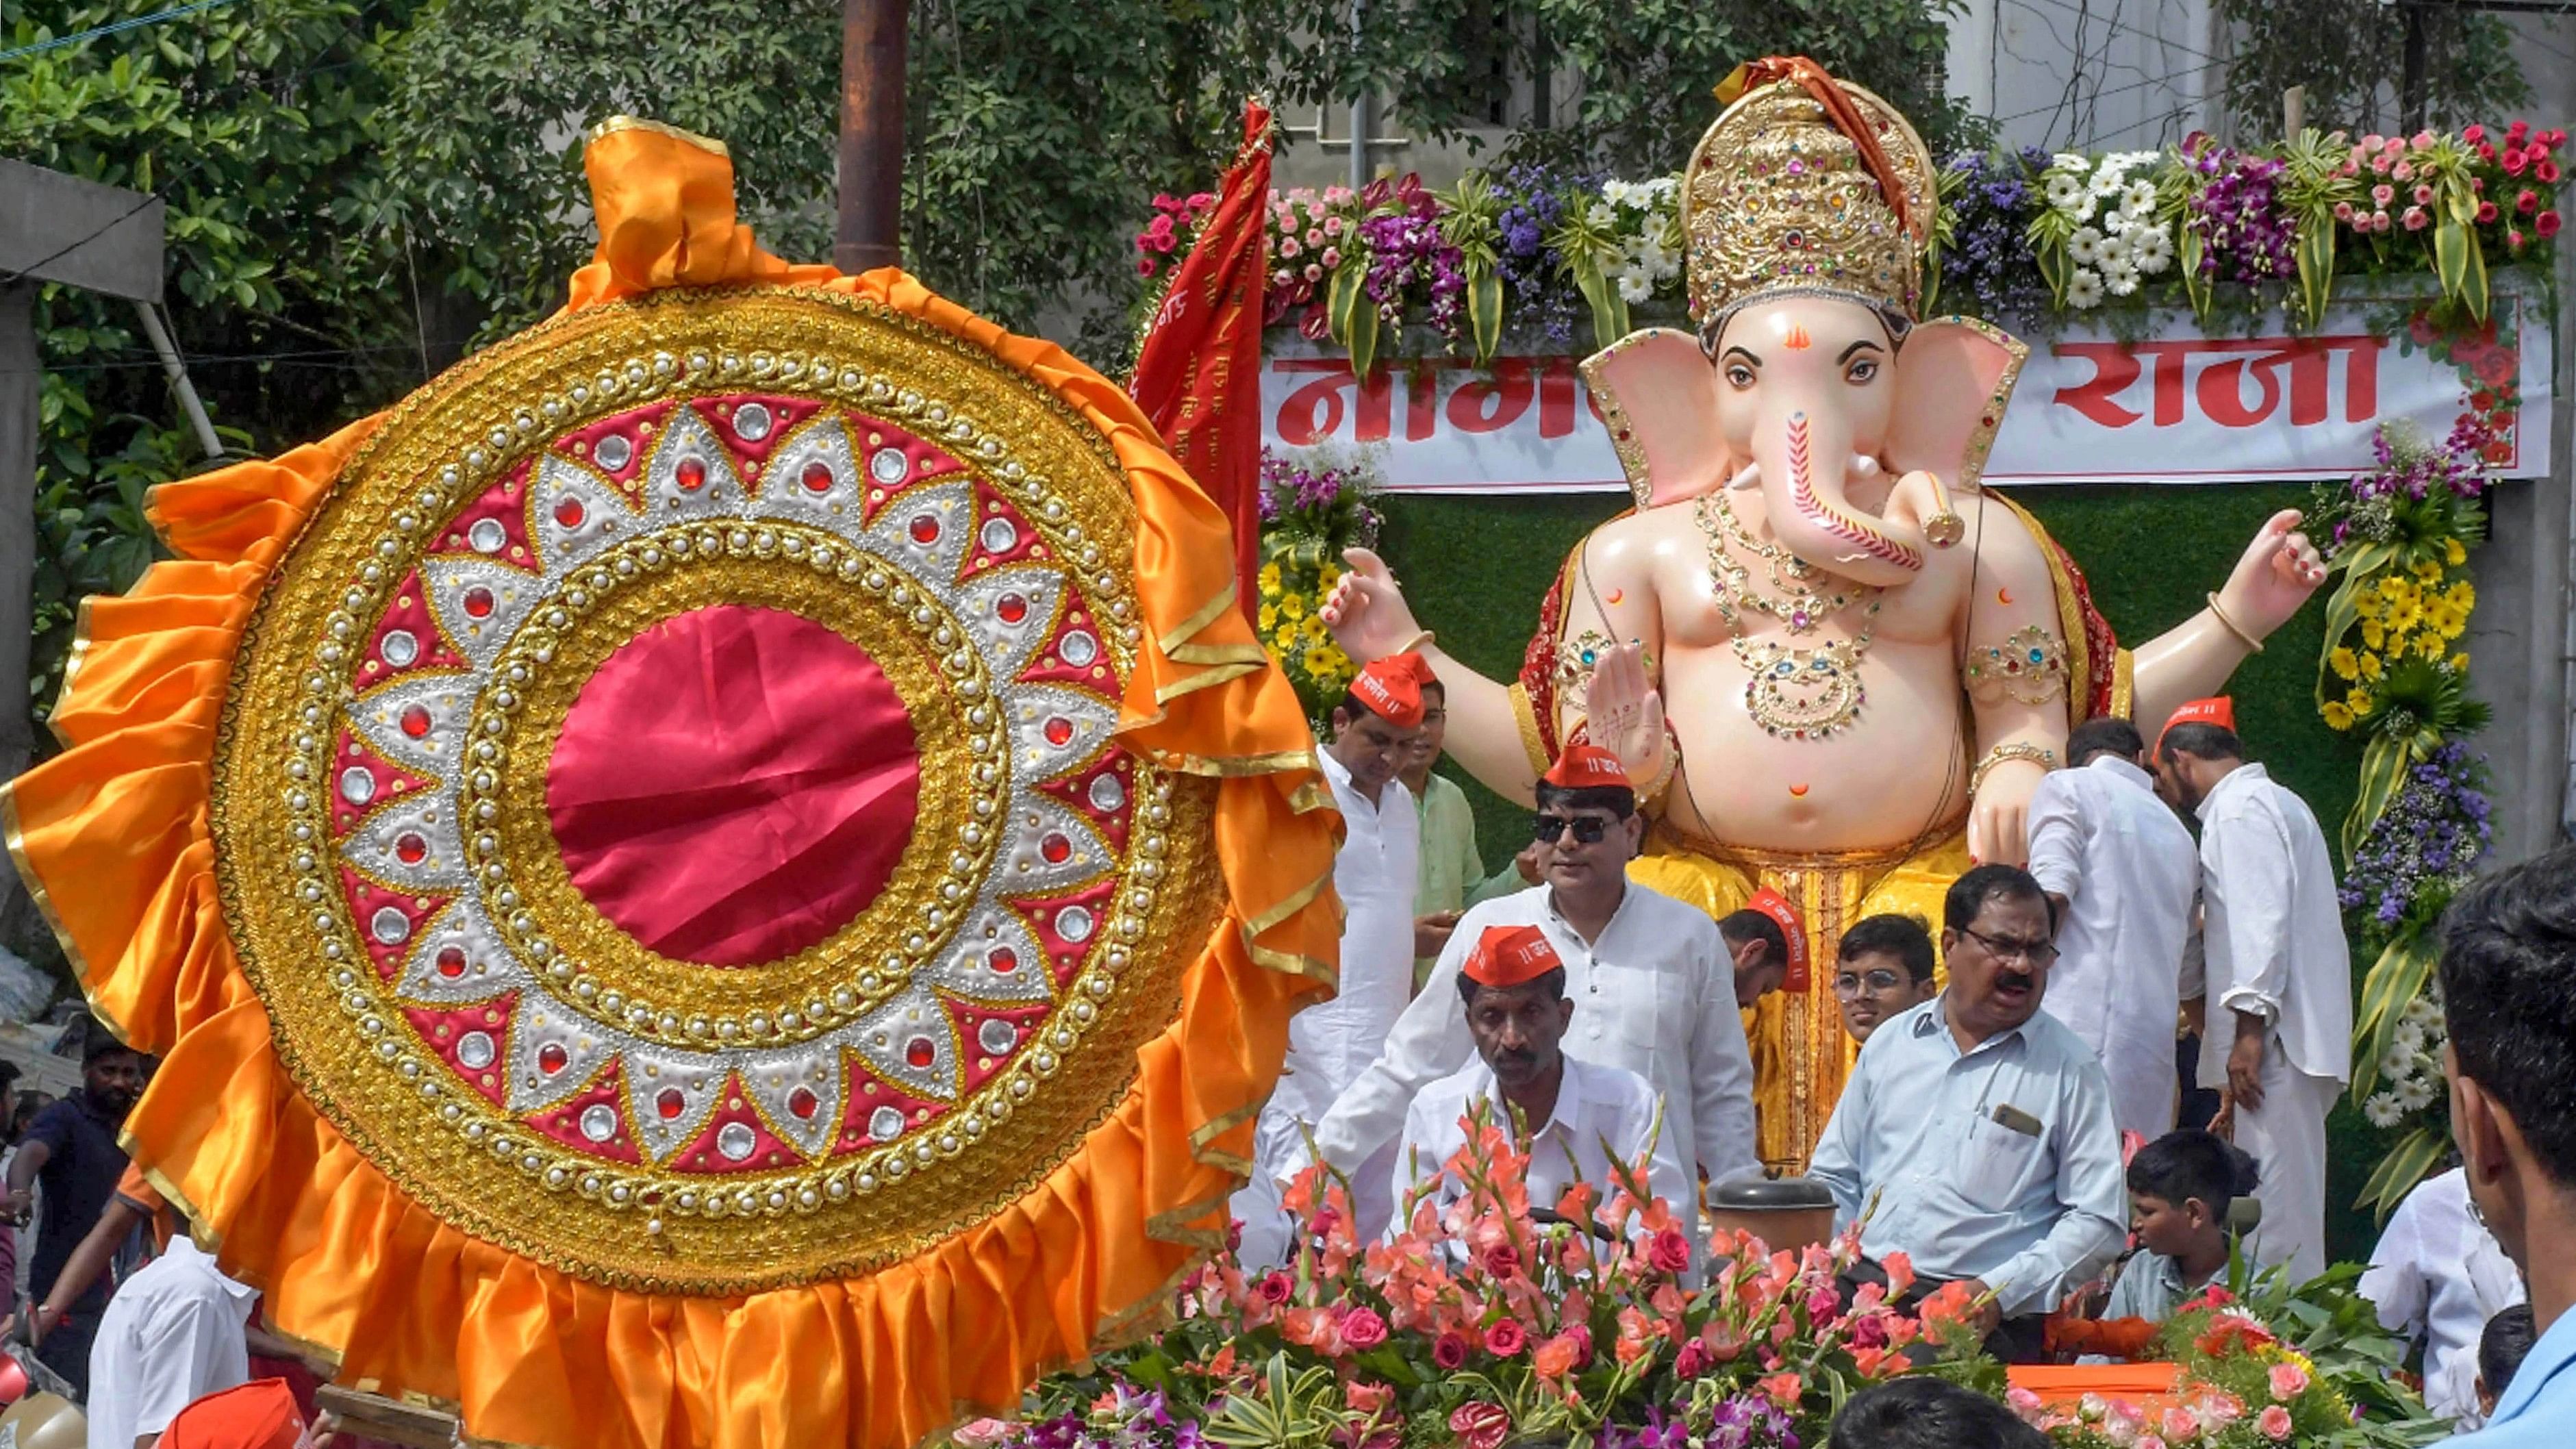 <div class="paragraphs"><p>Devotees carry an idol of Lord Ganesha 'Nagpurka Raja' to a pandal for the Ganesh Chaturthi celebrations, in Nagpur, Sunday.</p></div>